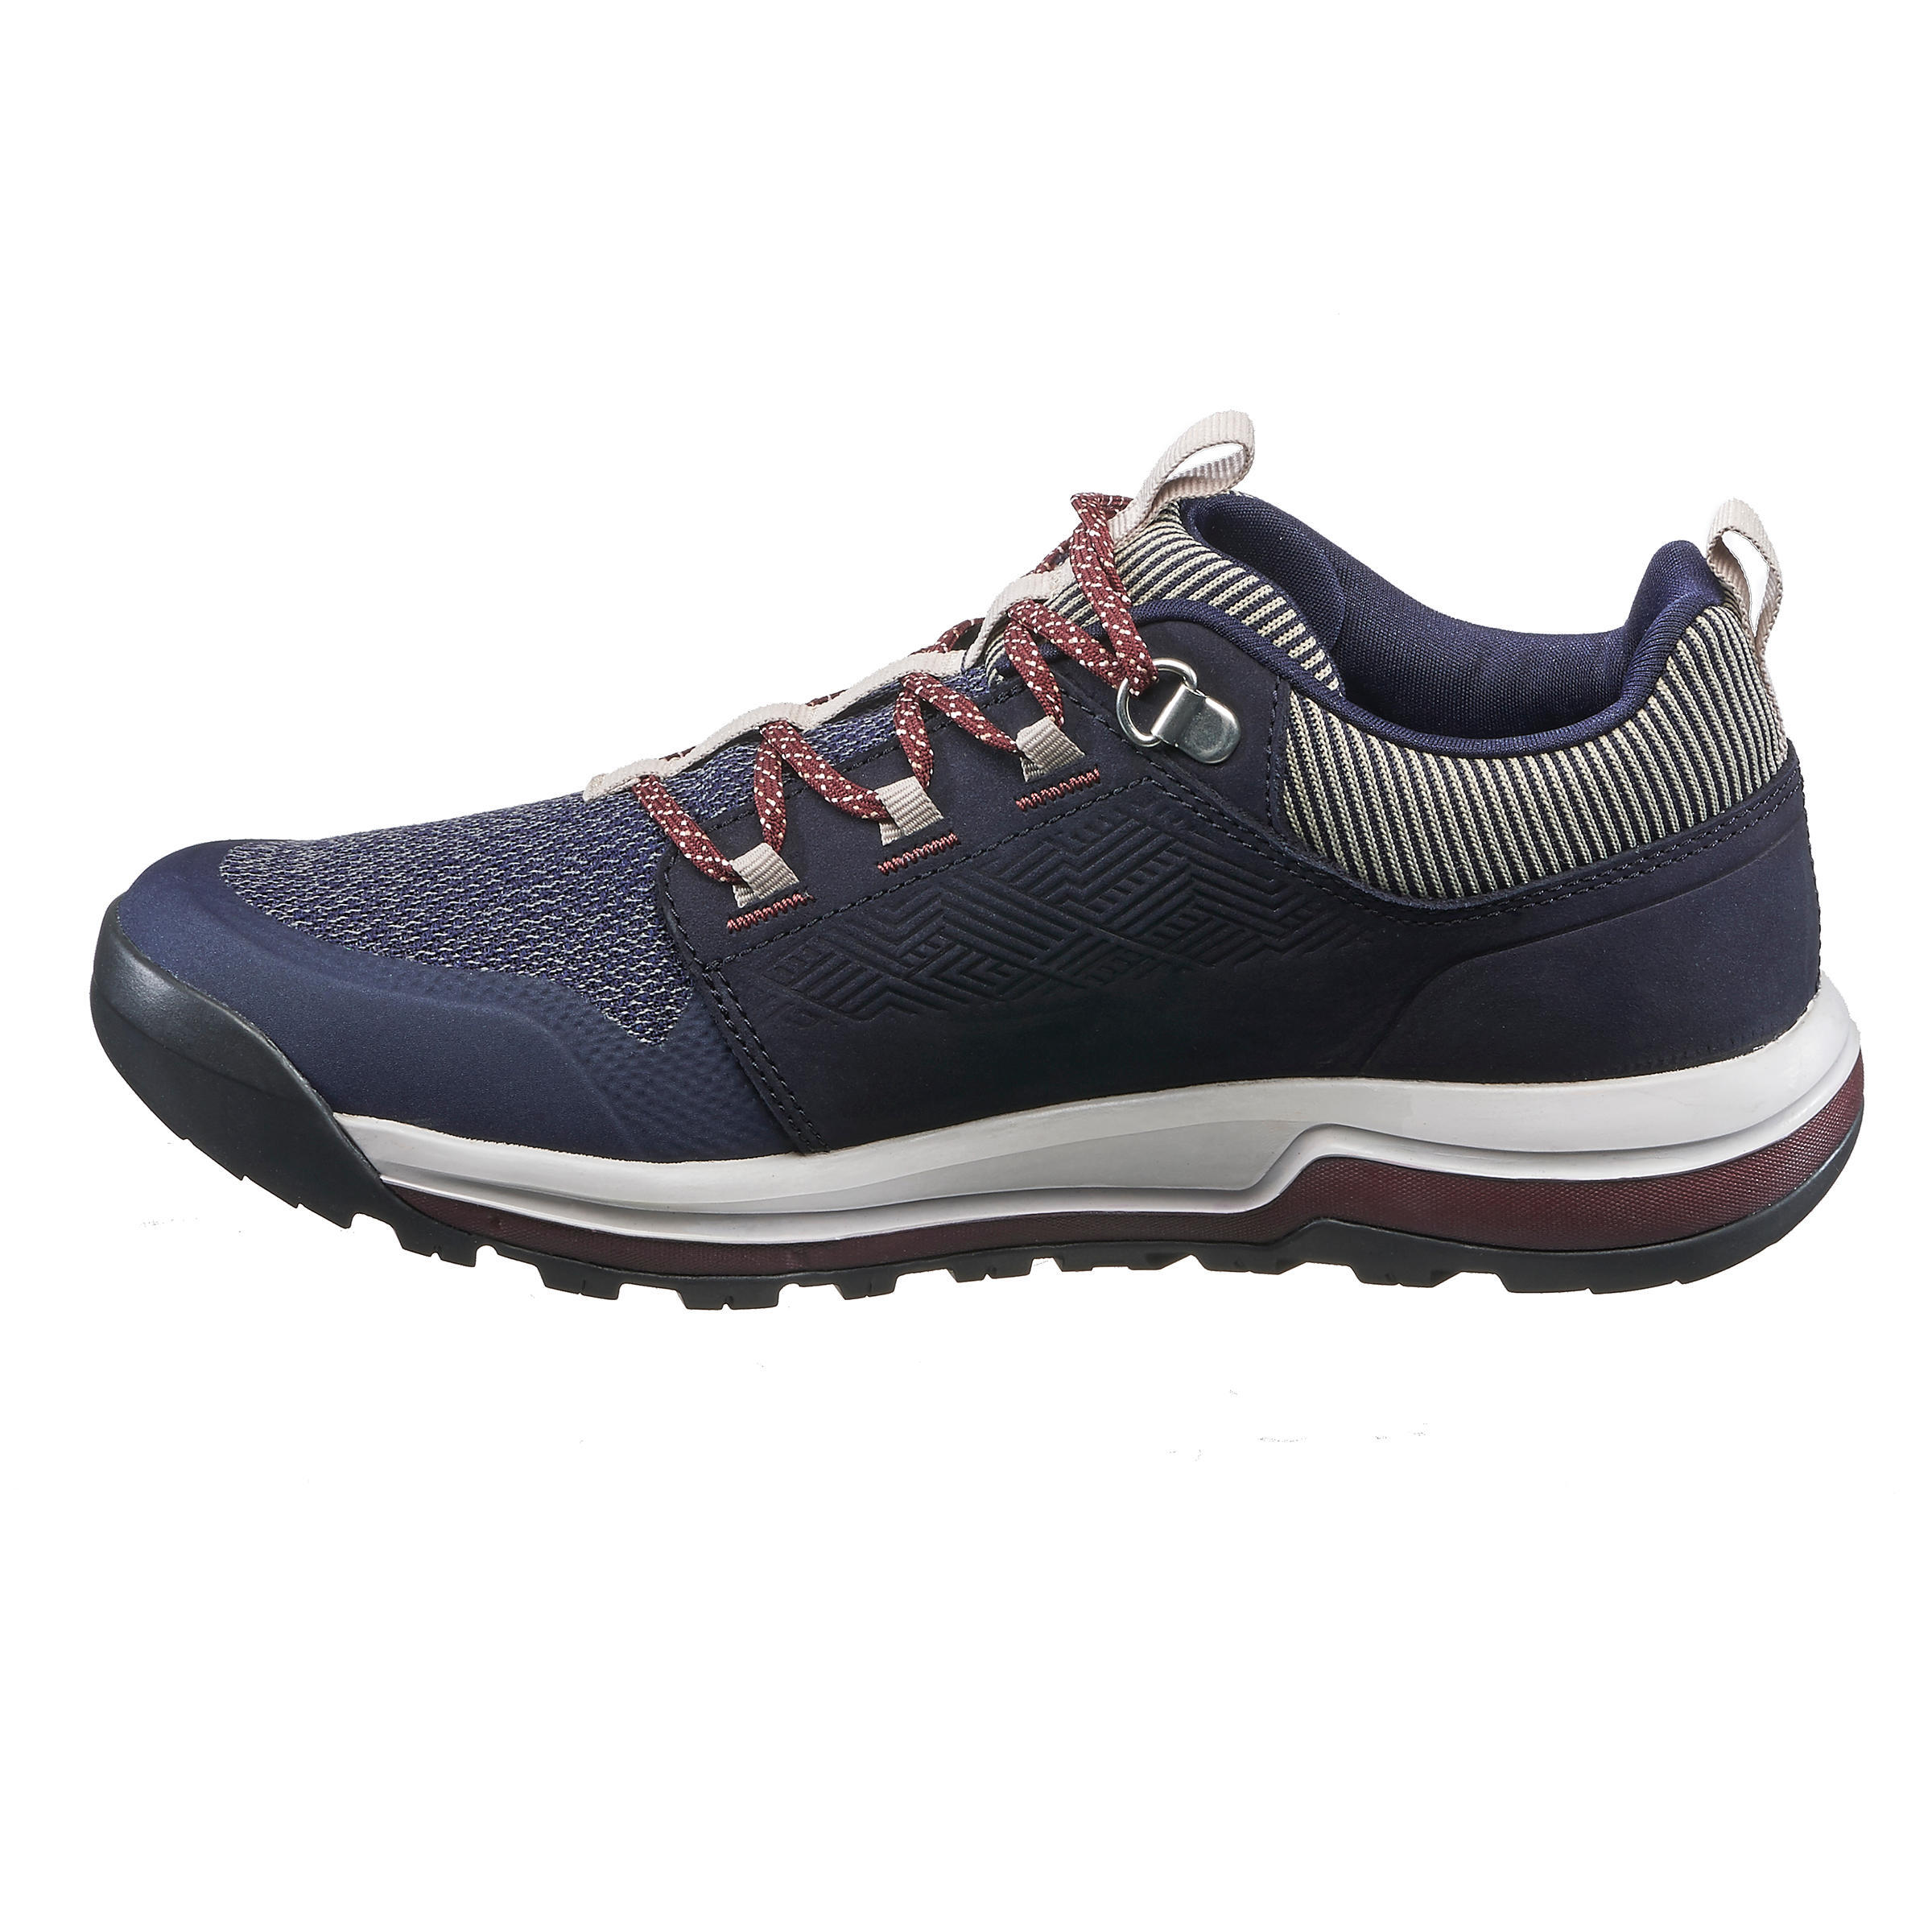 Women's Eco-Friendly Country Walking Shoes - Navy 3/9